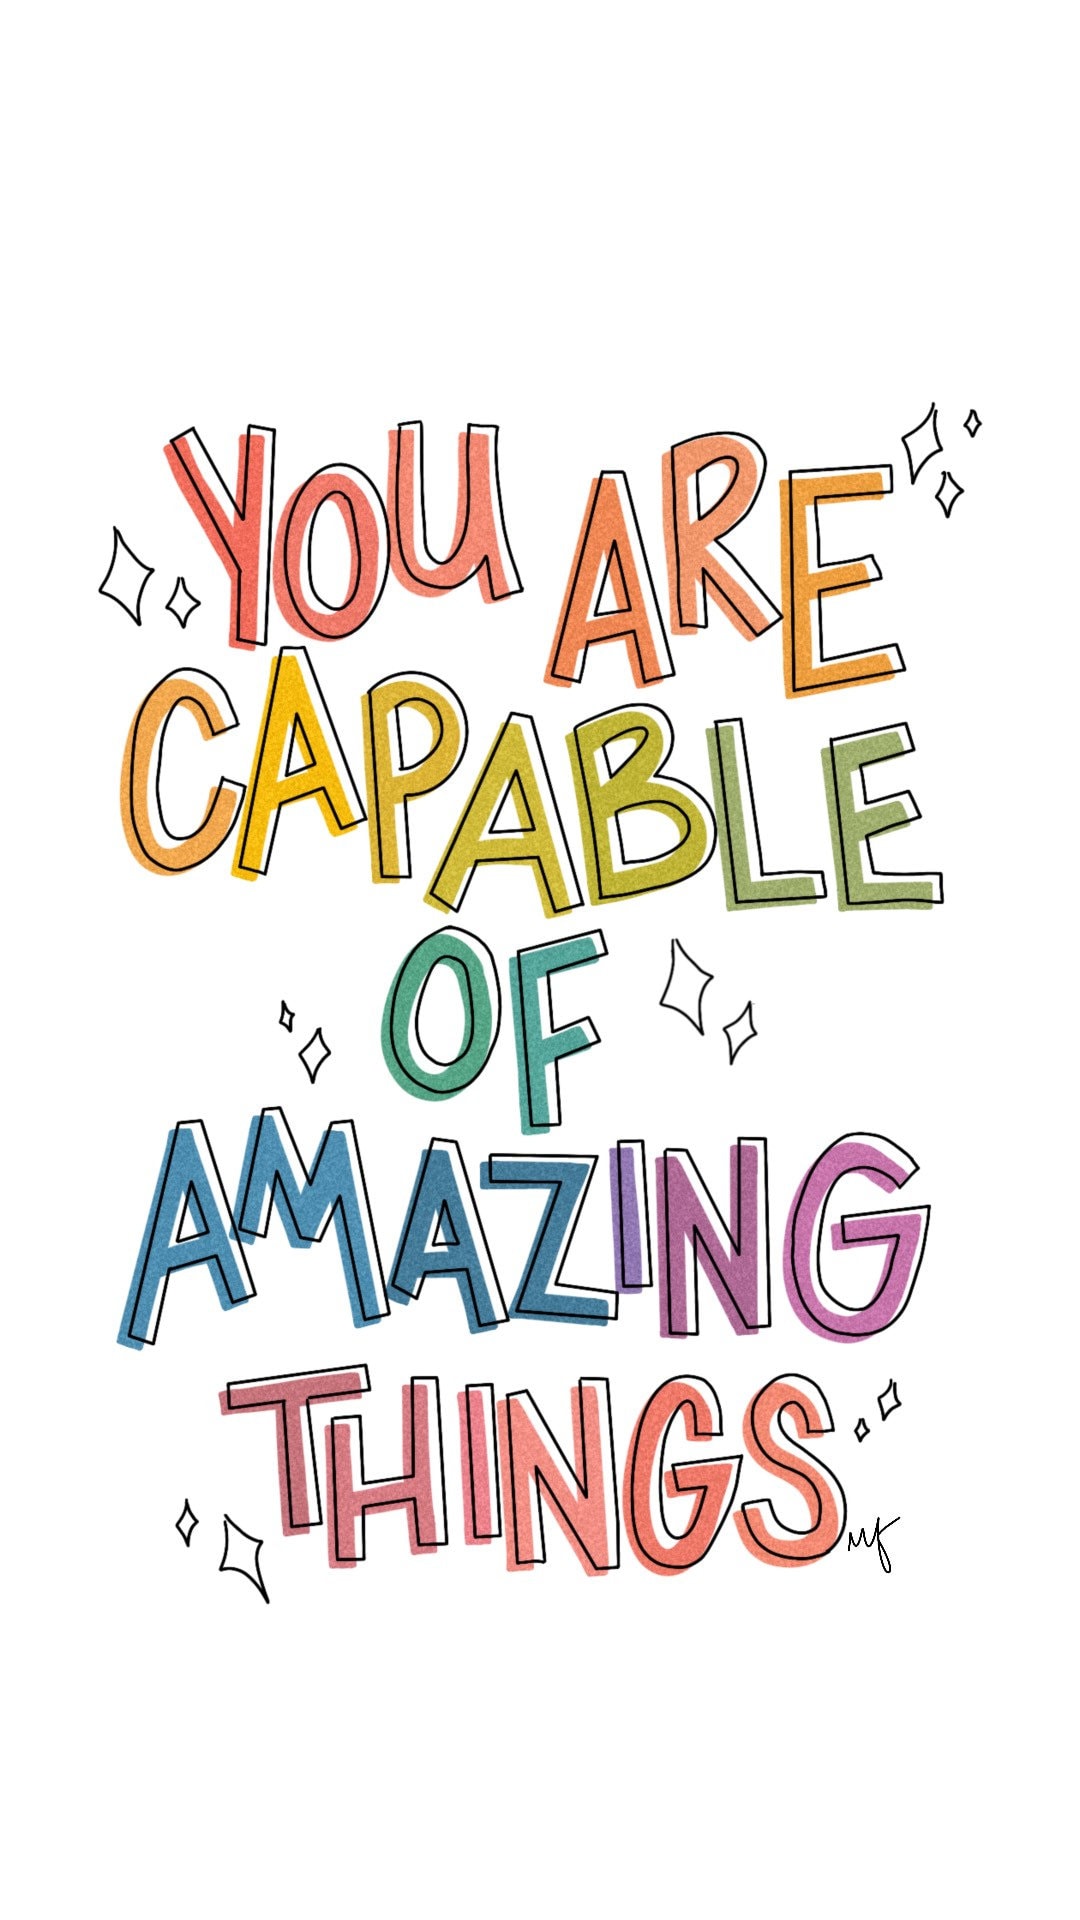 You Are Capable of Amazing Things Rainbow Digital Download Print - Etsy